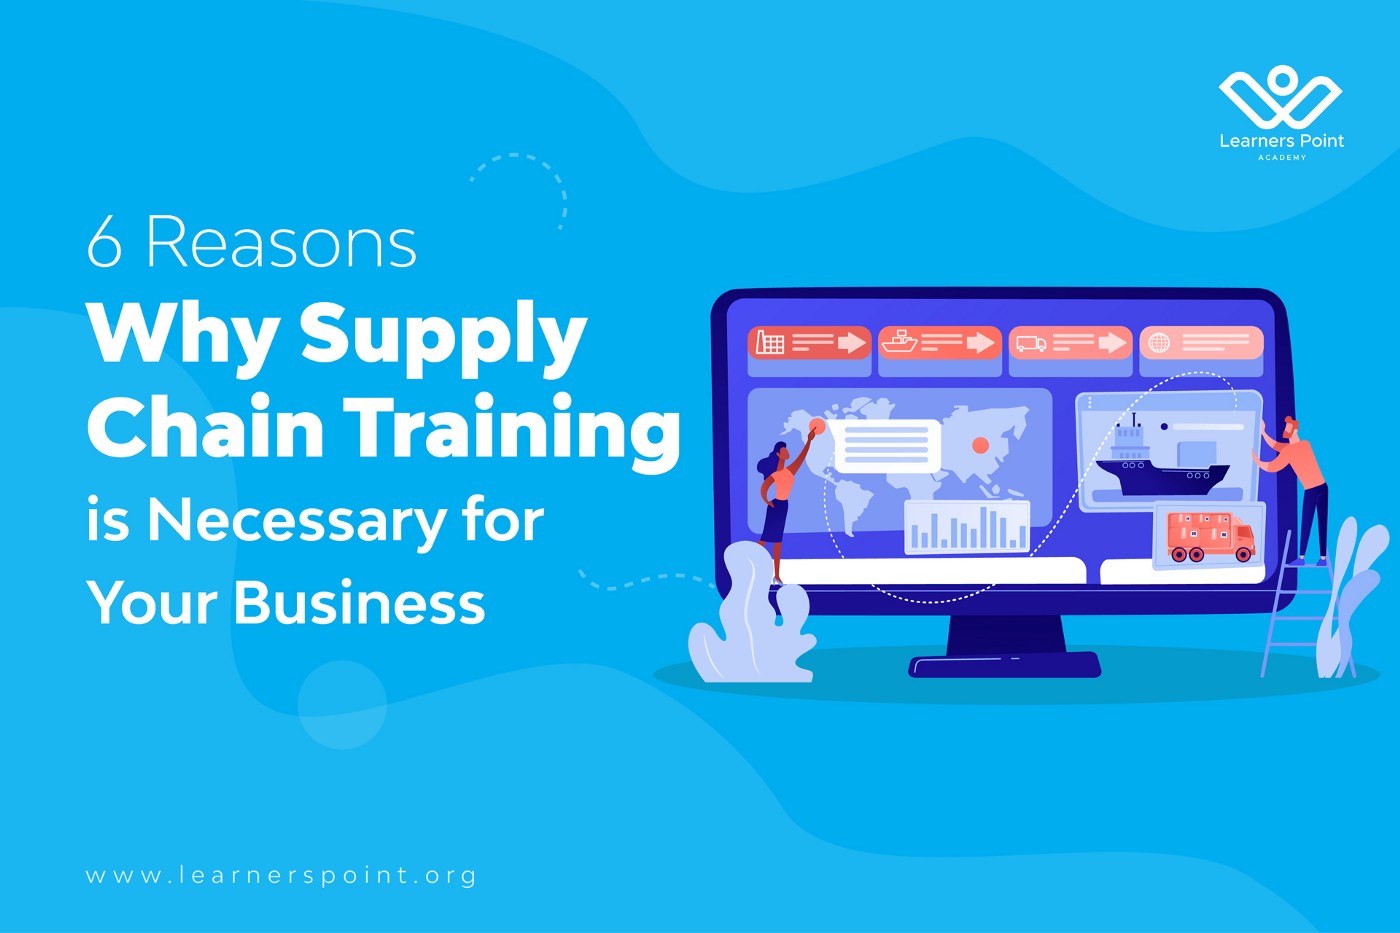 6 Reasons Why Supply Chain Training is Necessary for Your Business